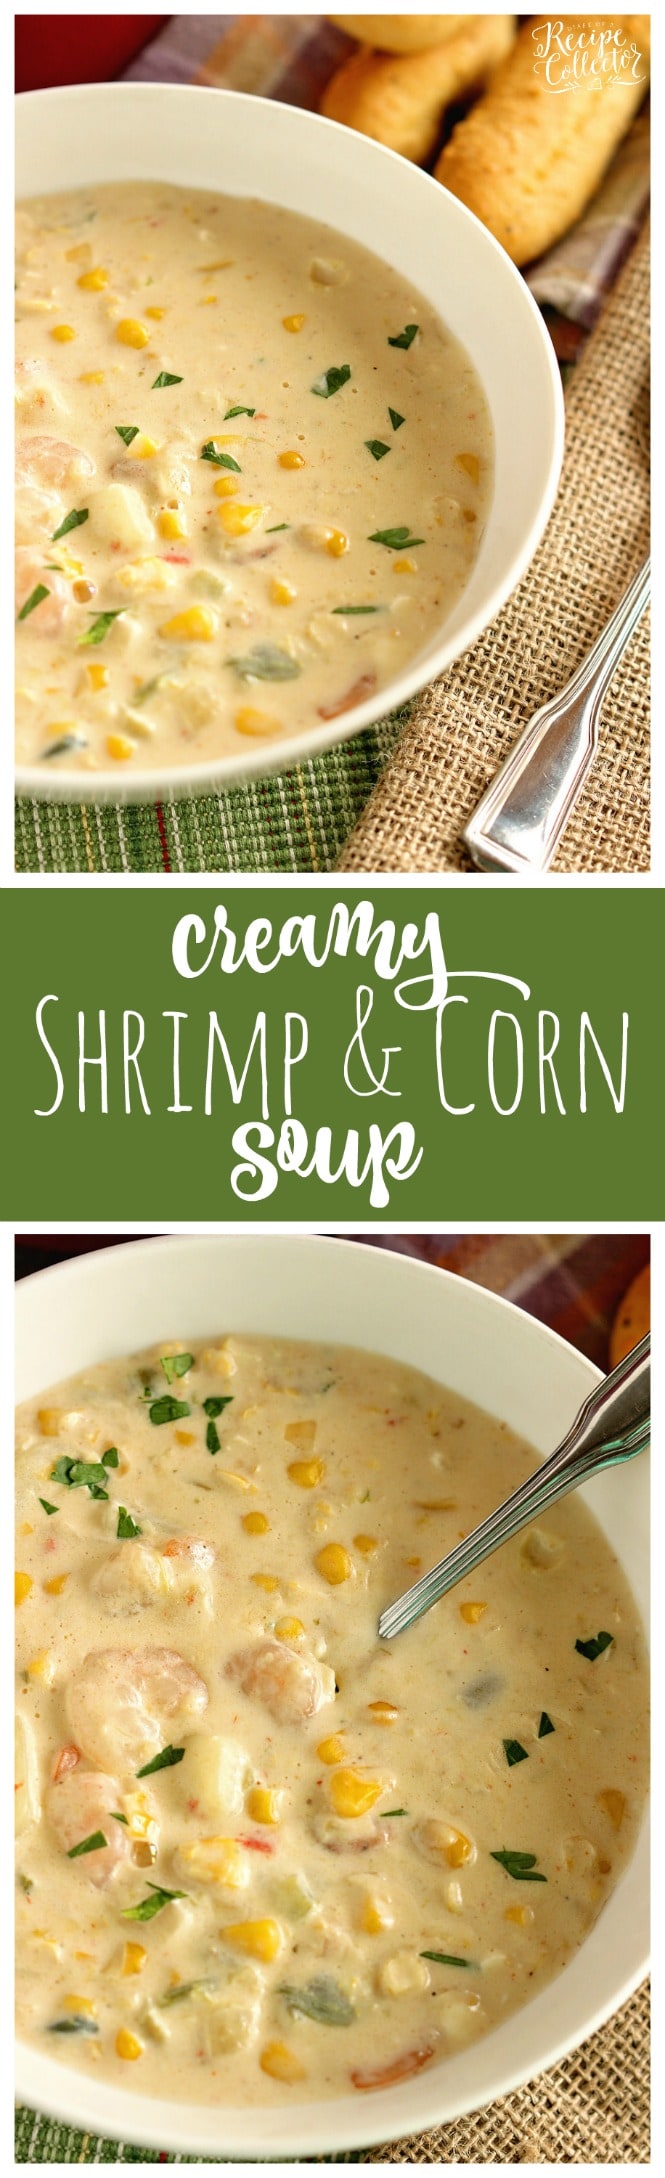 Creamy Shrimp & Corn Soup - A creamy Cajun-flavored soup filled with shrimp, corn, and potatoes. It's a great soup for company too!